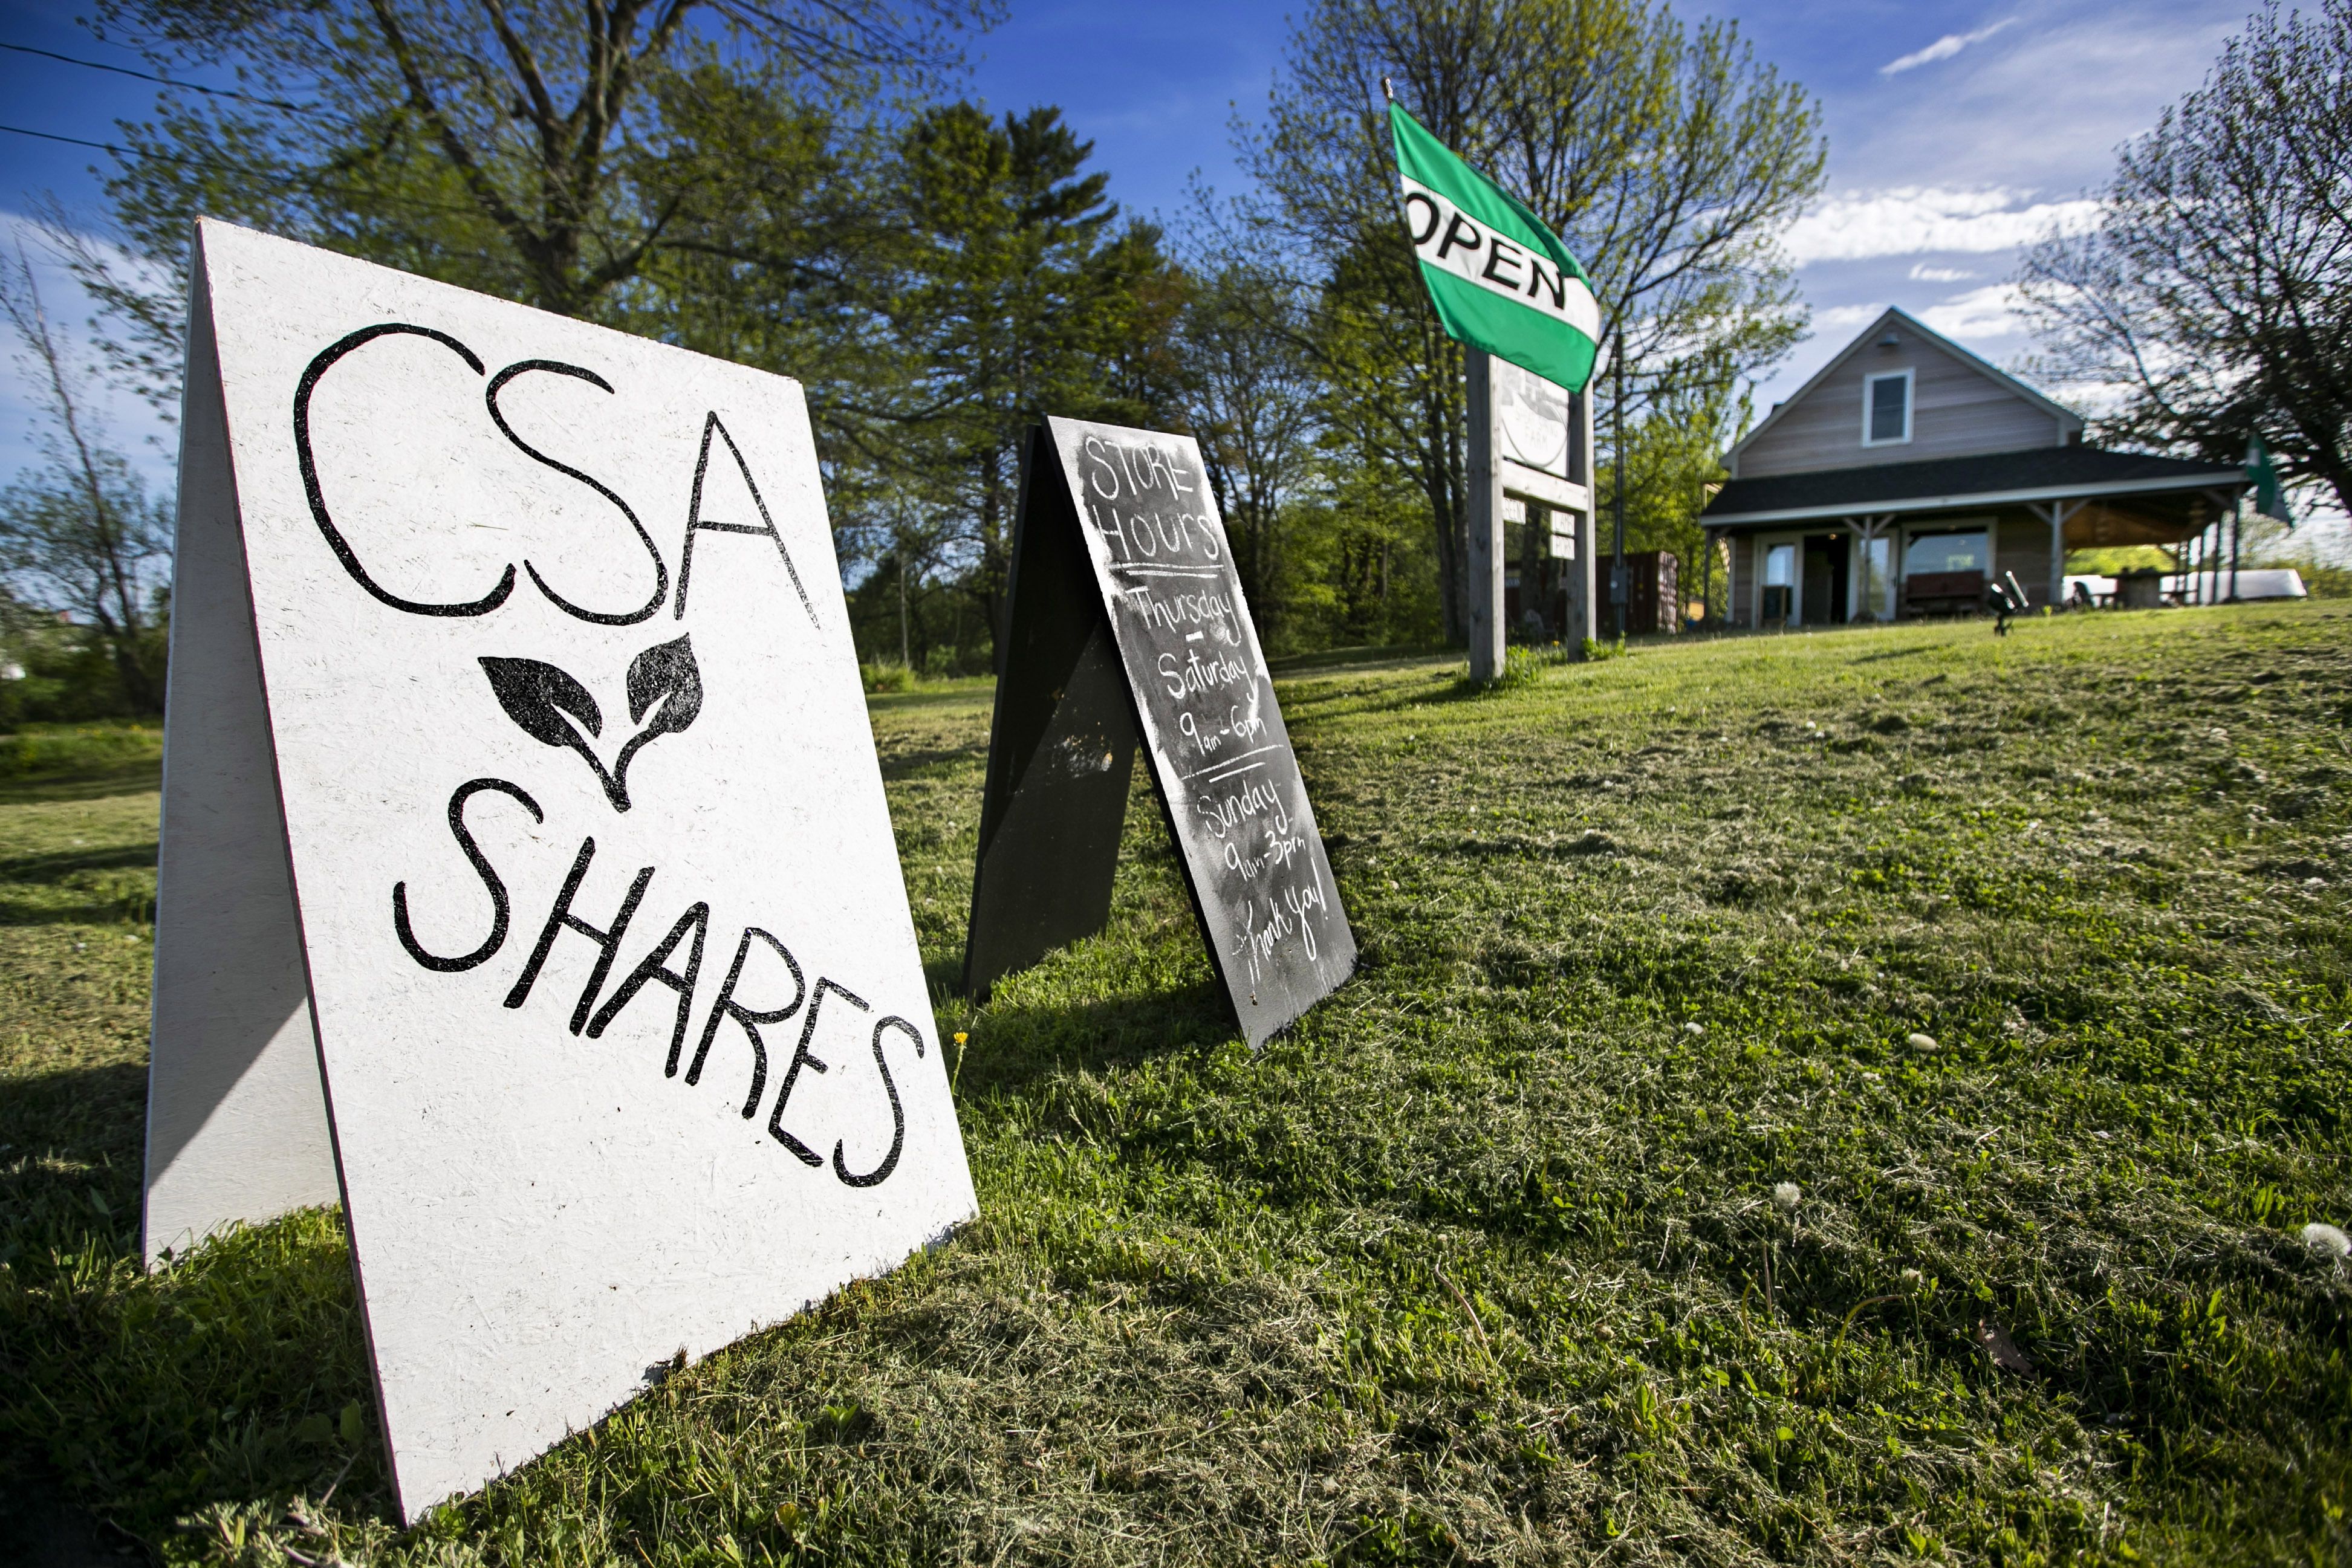 In this Thursday, May 28, 2020 photo, a sign advertises community supported agriculture shares at Spear Spring Farm in Warren, Maine. Spear Spring is one of many farms that have seen an uptick in the number of CSA shares sold to customers, most likely as a result to the coronavirus pandemic. (AP Photo/Robert F. Bukaty)